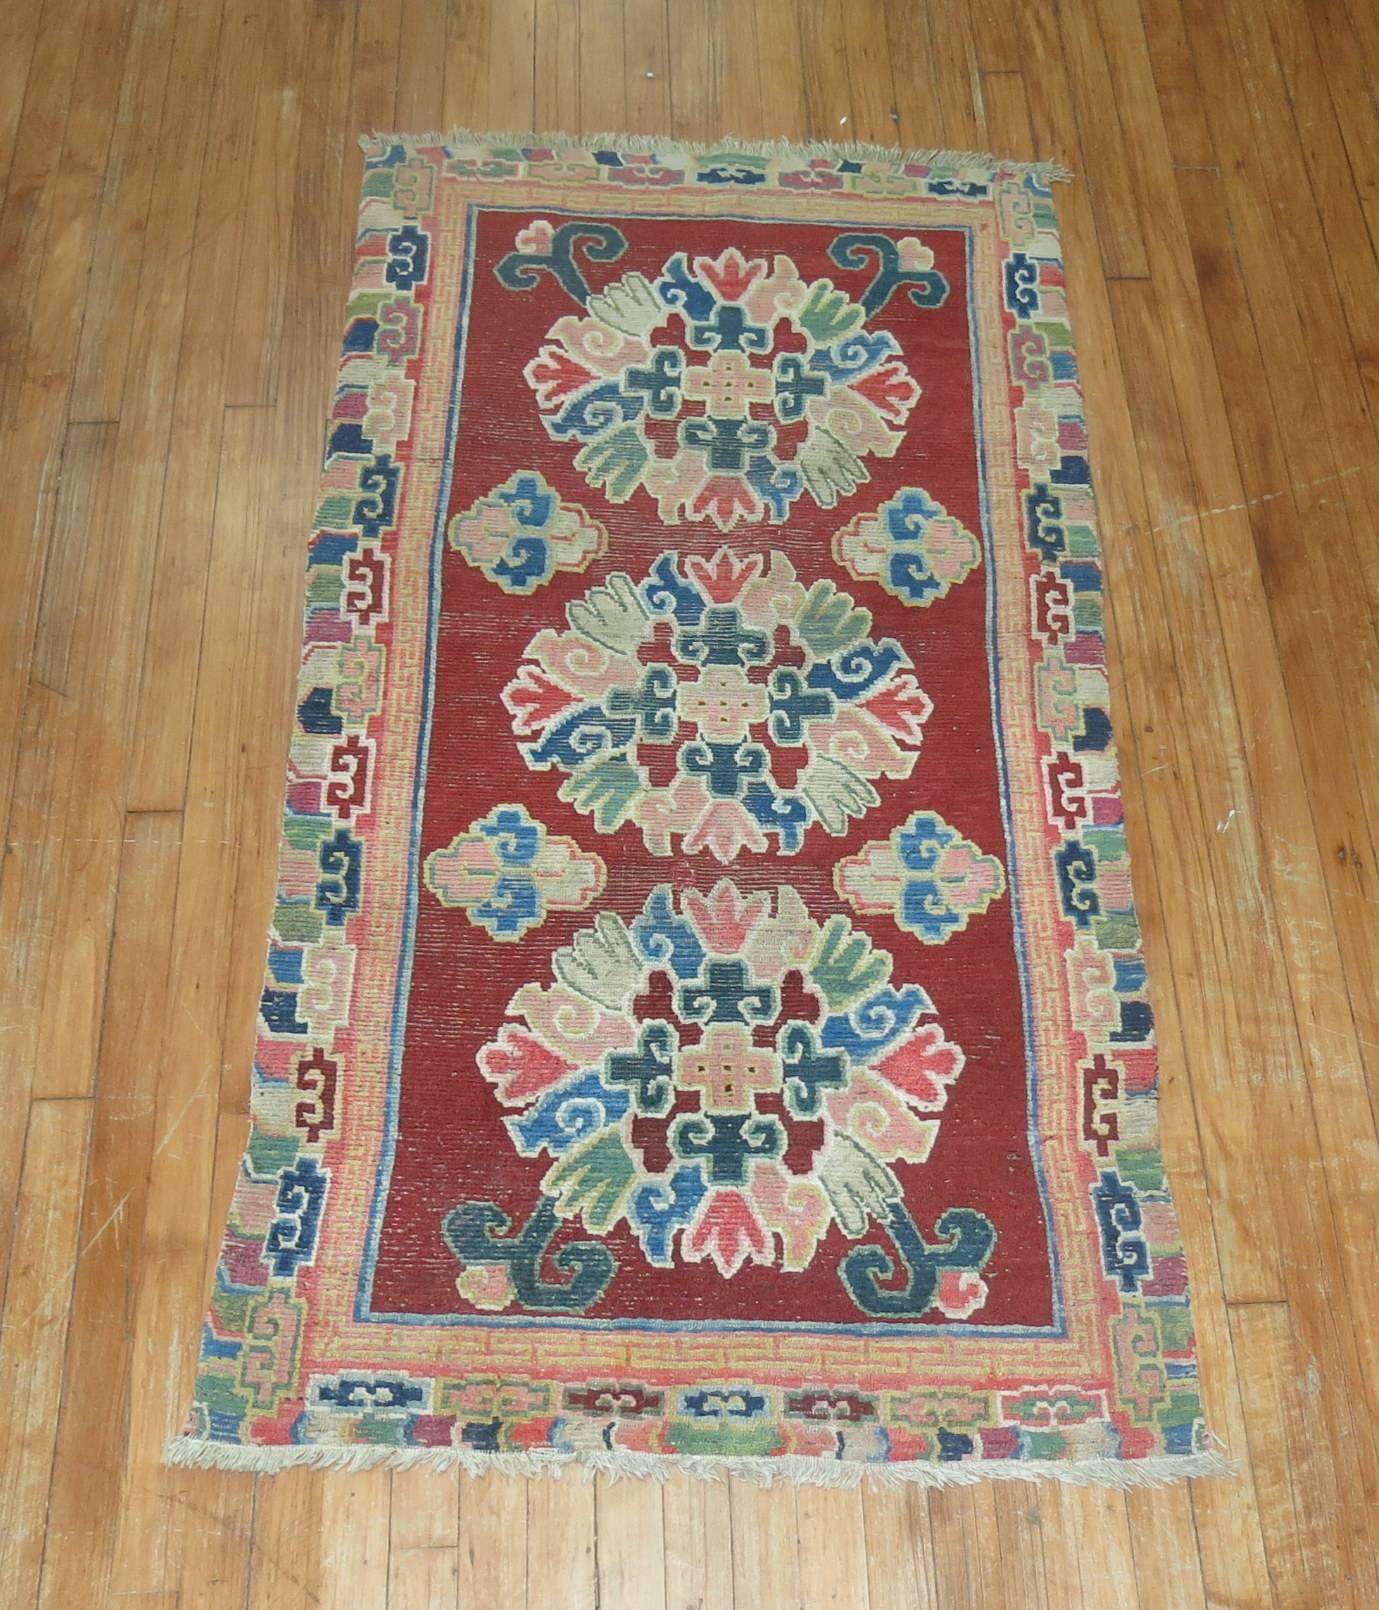 An exquisite antique Tibetan rug. Chinese red field with other colorful accents.